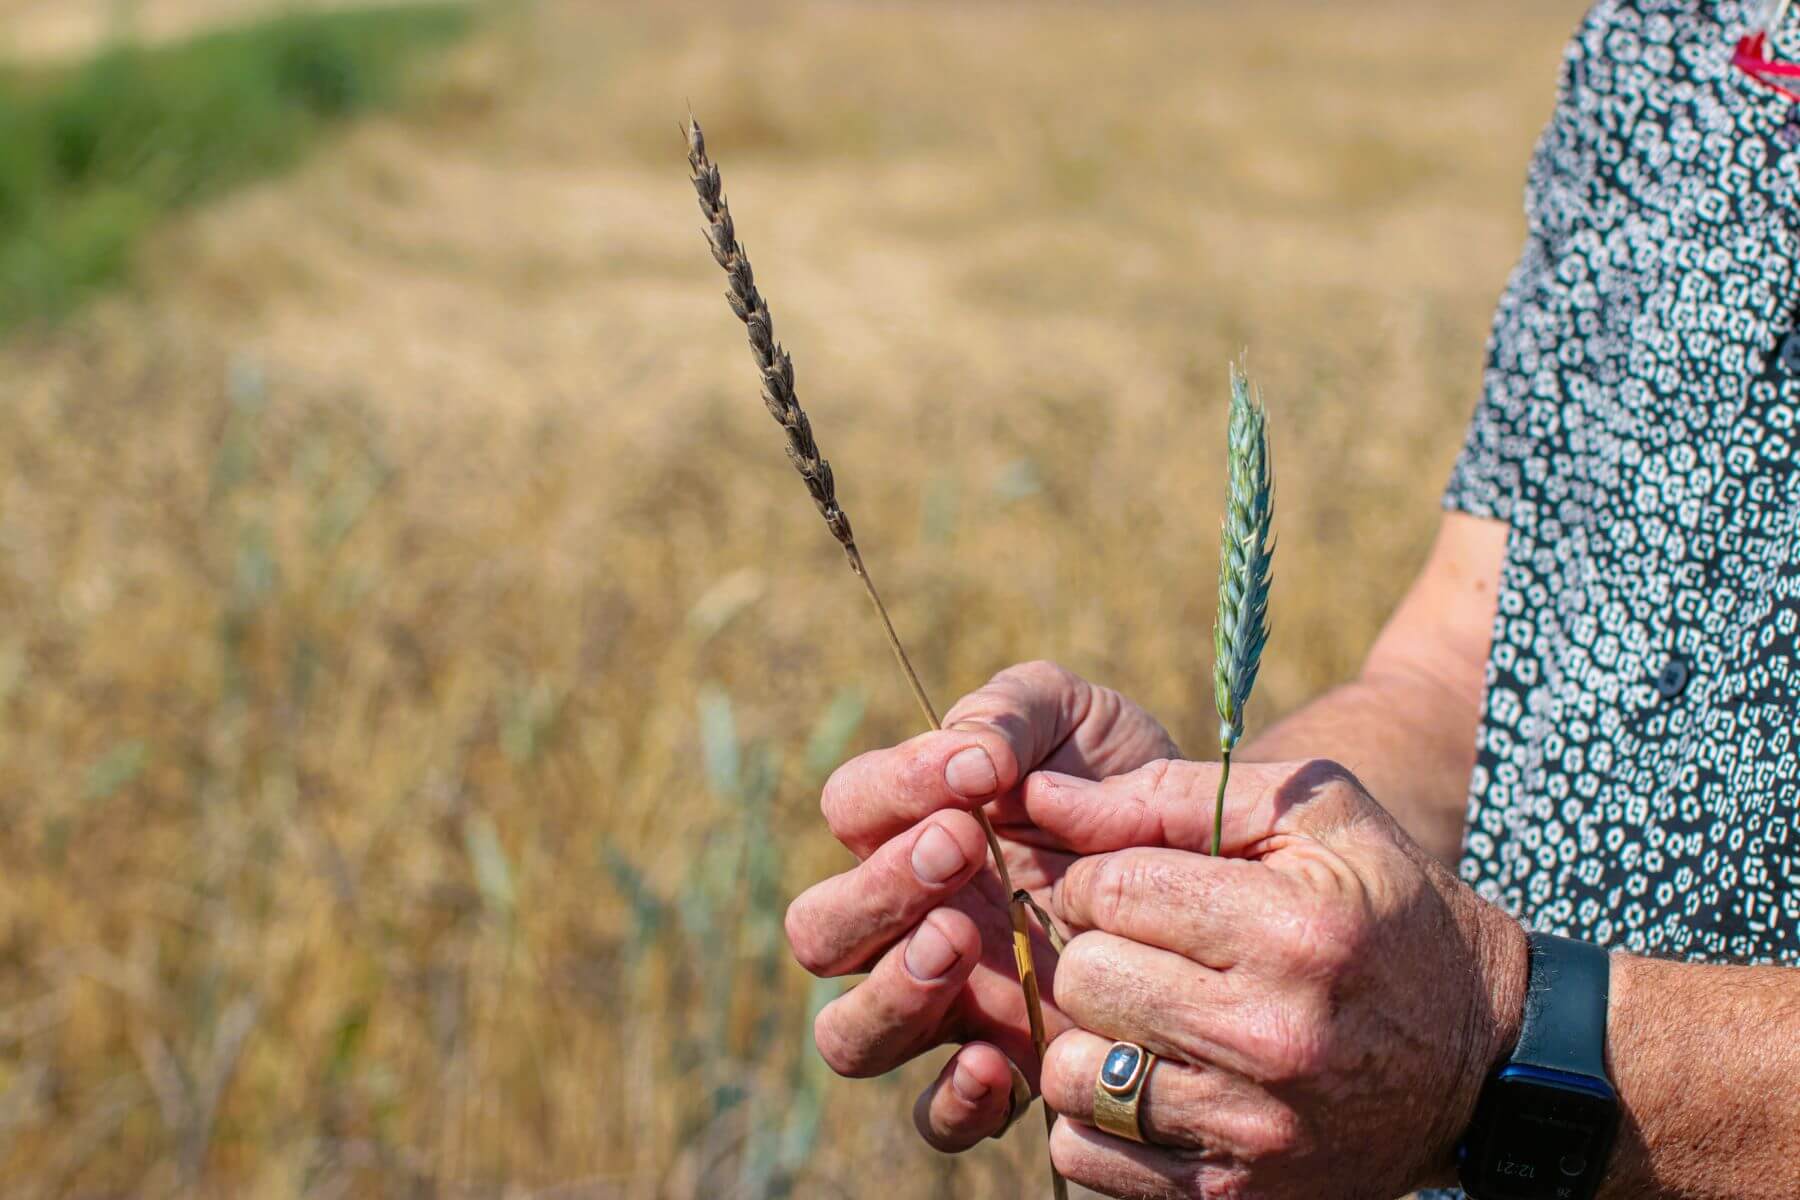 A farmer's hands hold golden shafts of wheat in the field.